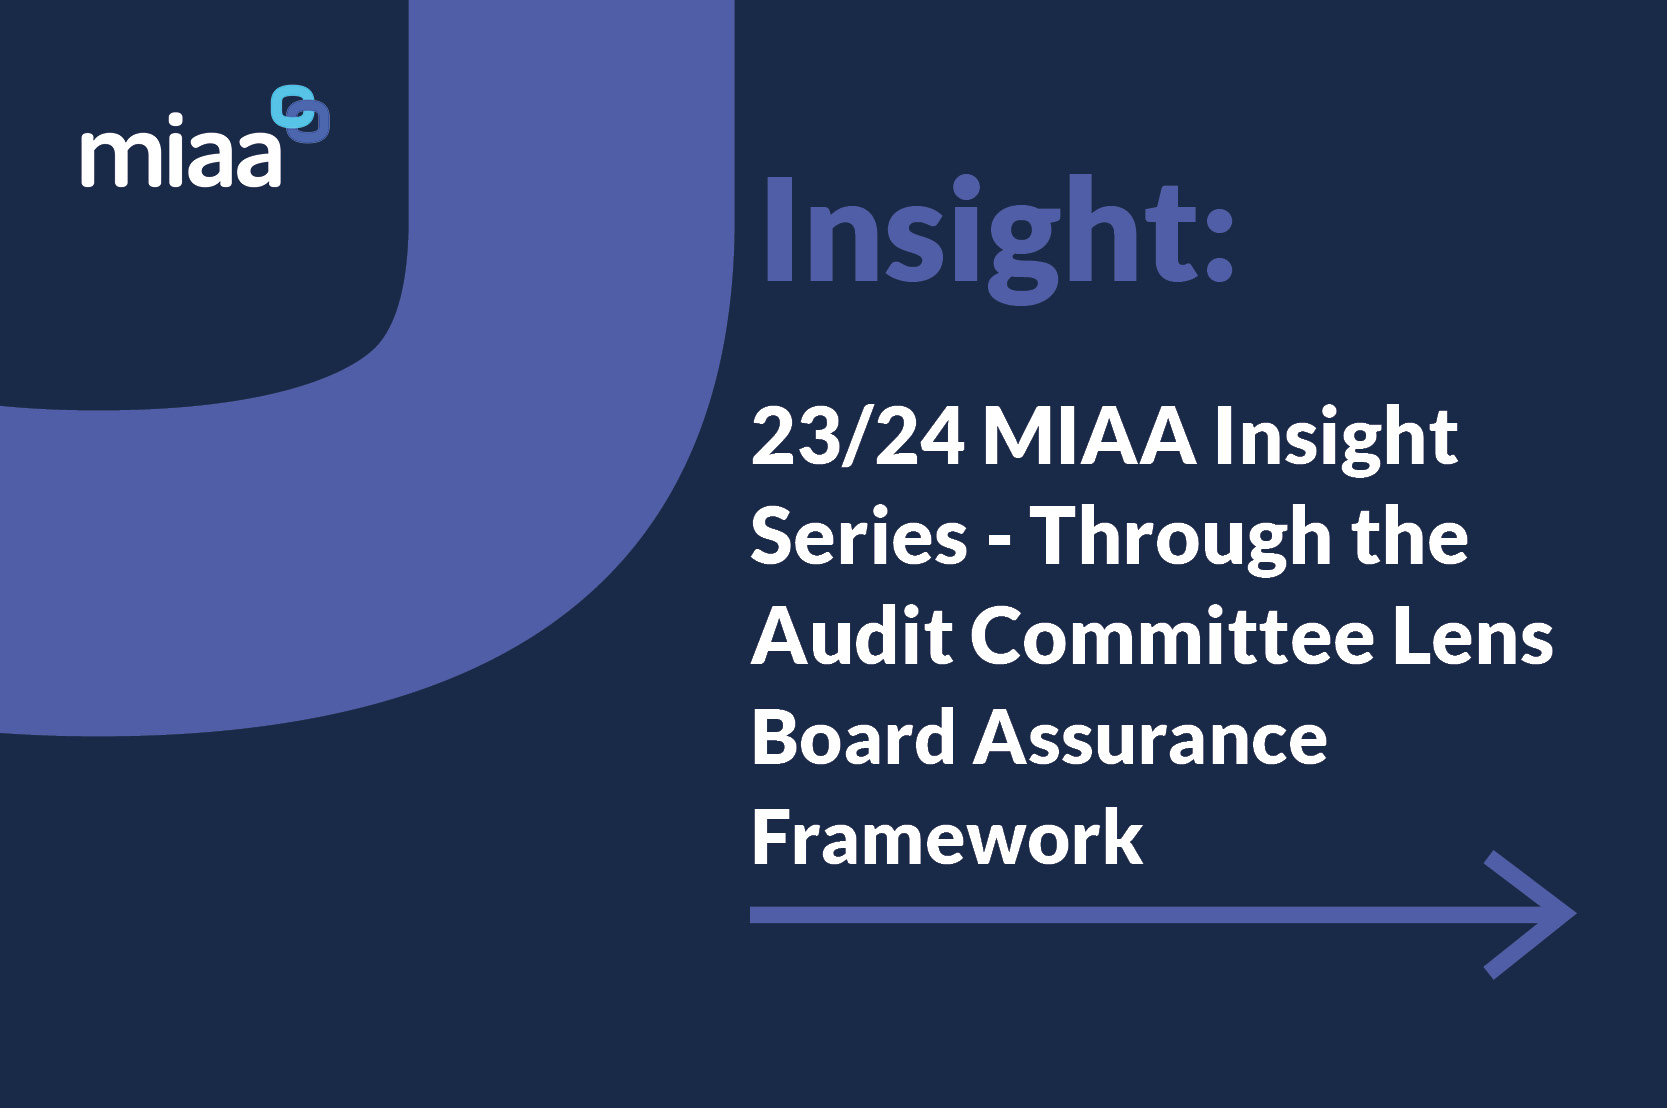 23/24 MIAA Insight Series - Through the Audit Committee Lens - Board Assurance Framework